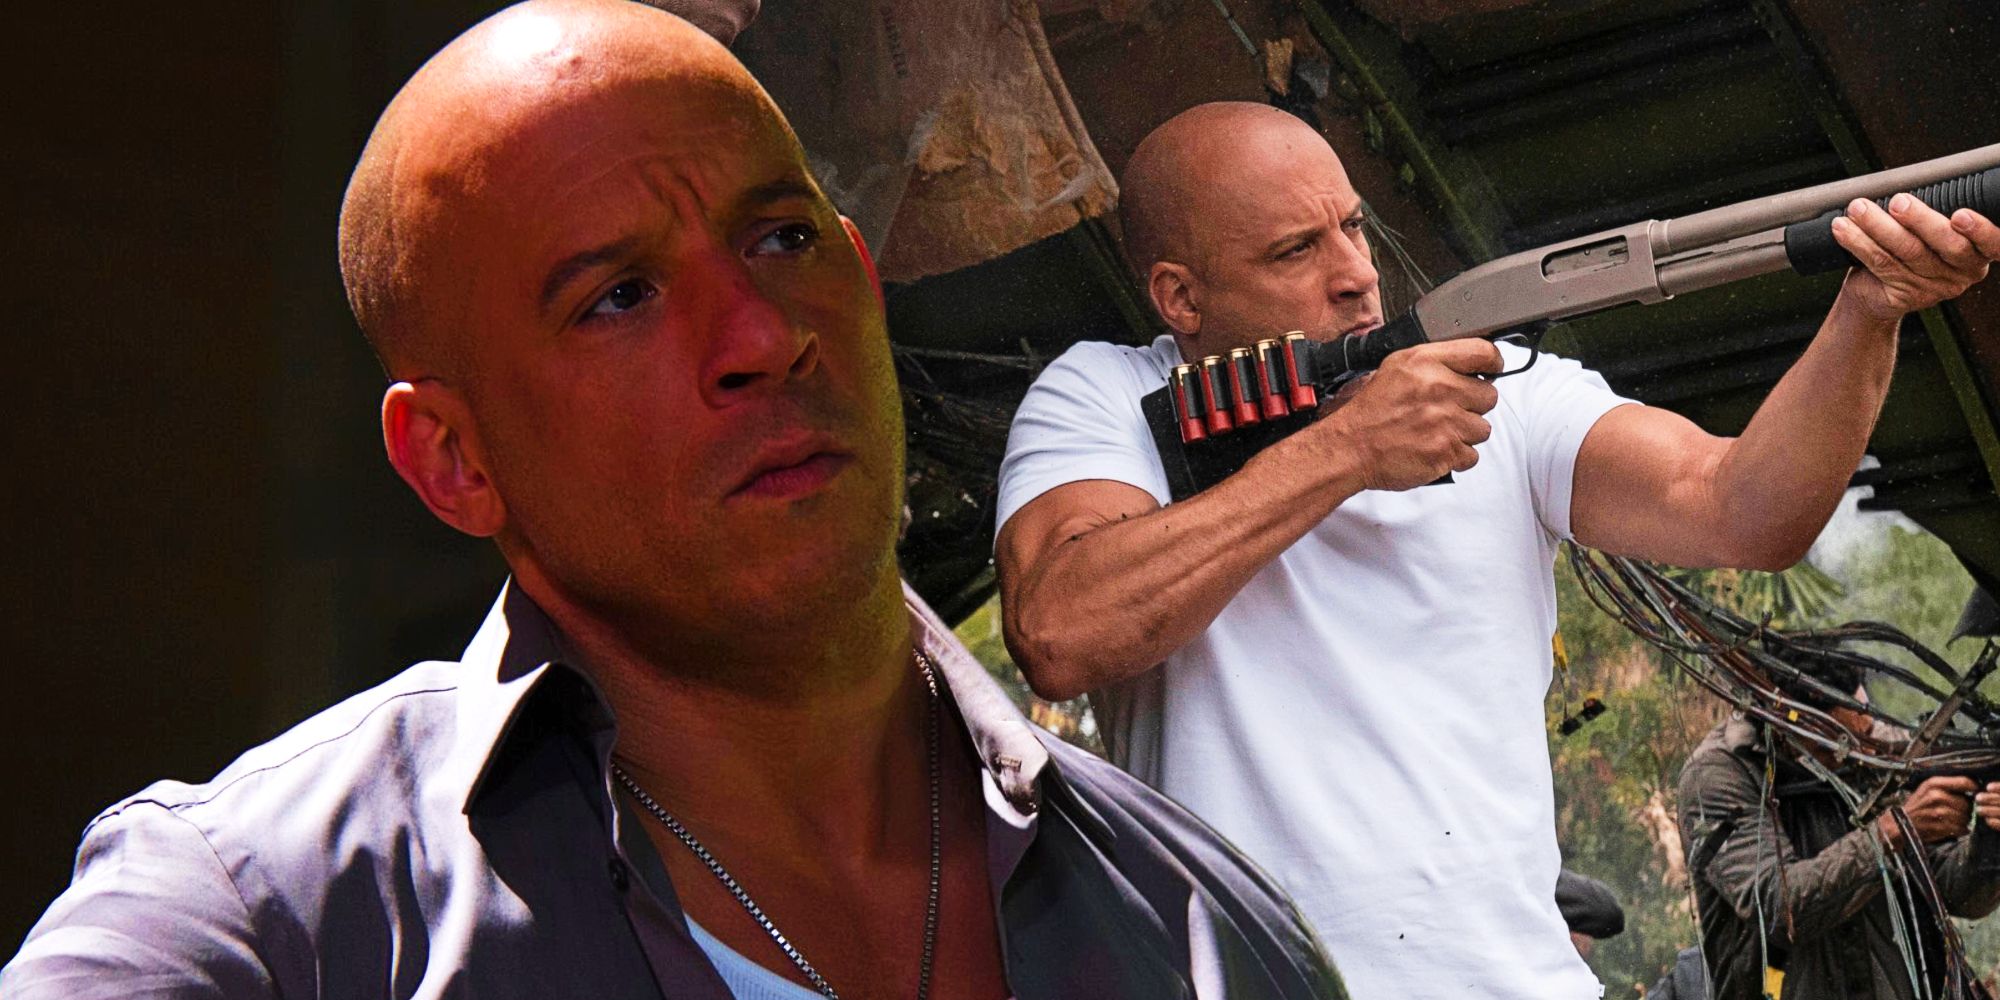 Fast Furious Theory Explains Why The Franchise Has Changed So Much